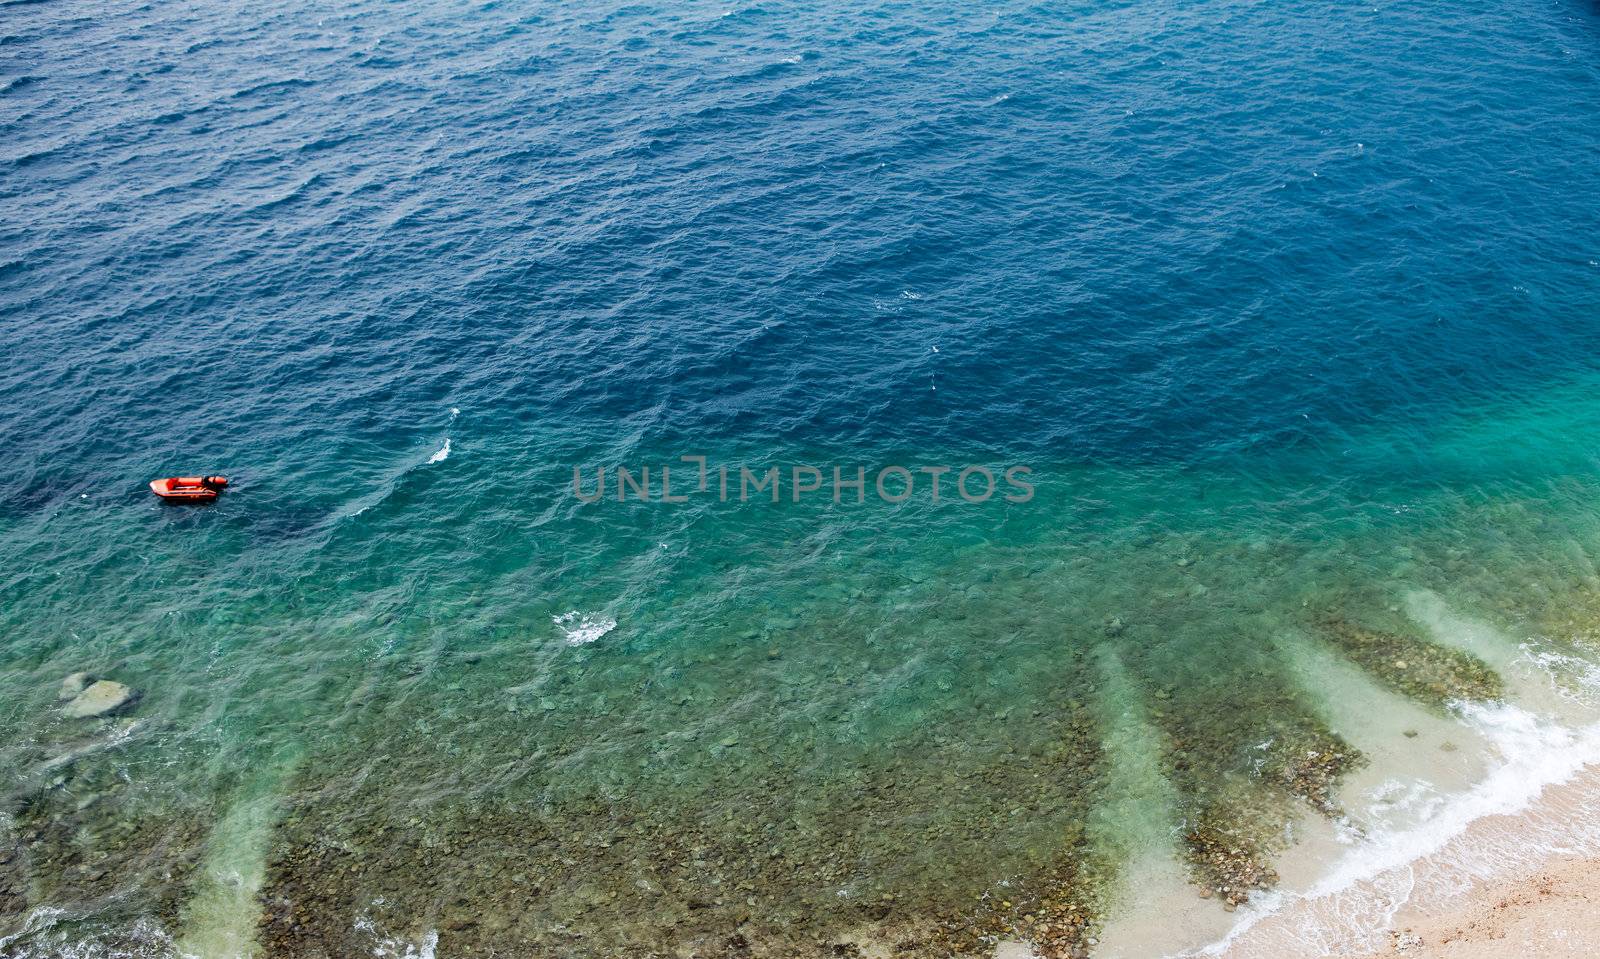 An aerial view of a beach and ocean - background texture